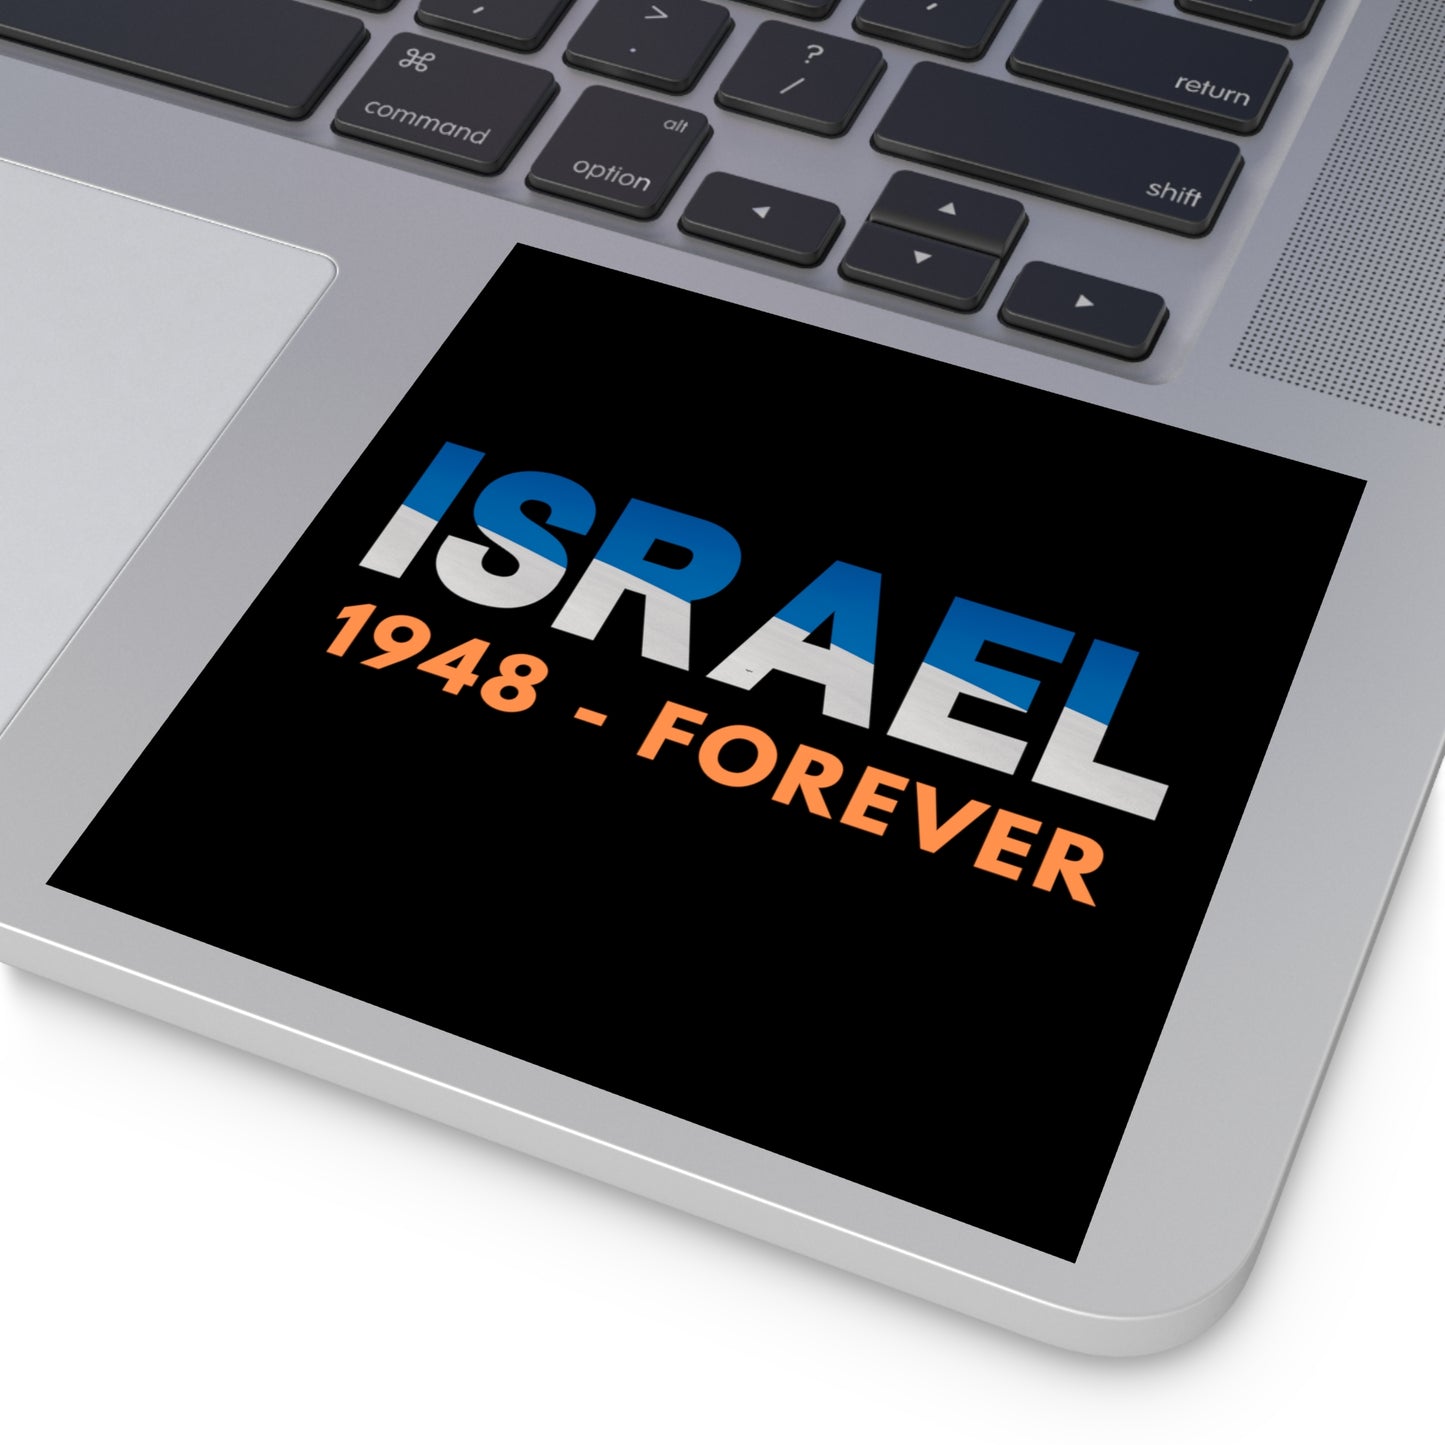 Israel 1948-Forever Square Stickers, Indoor\Outdoor